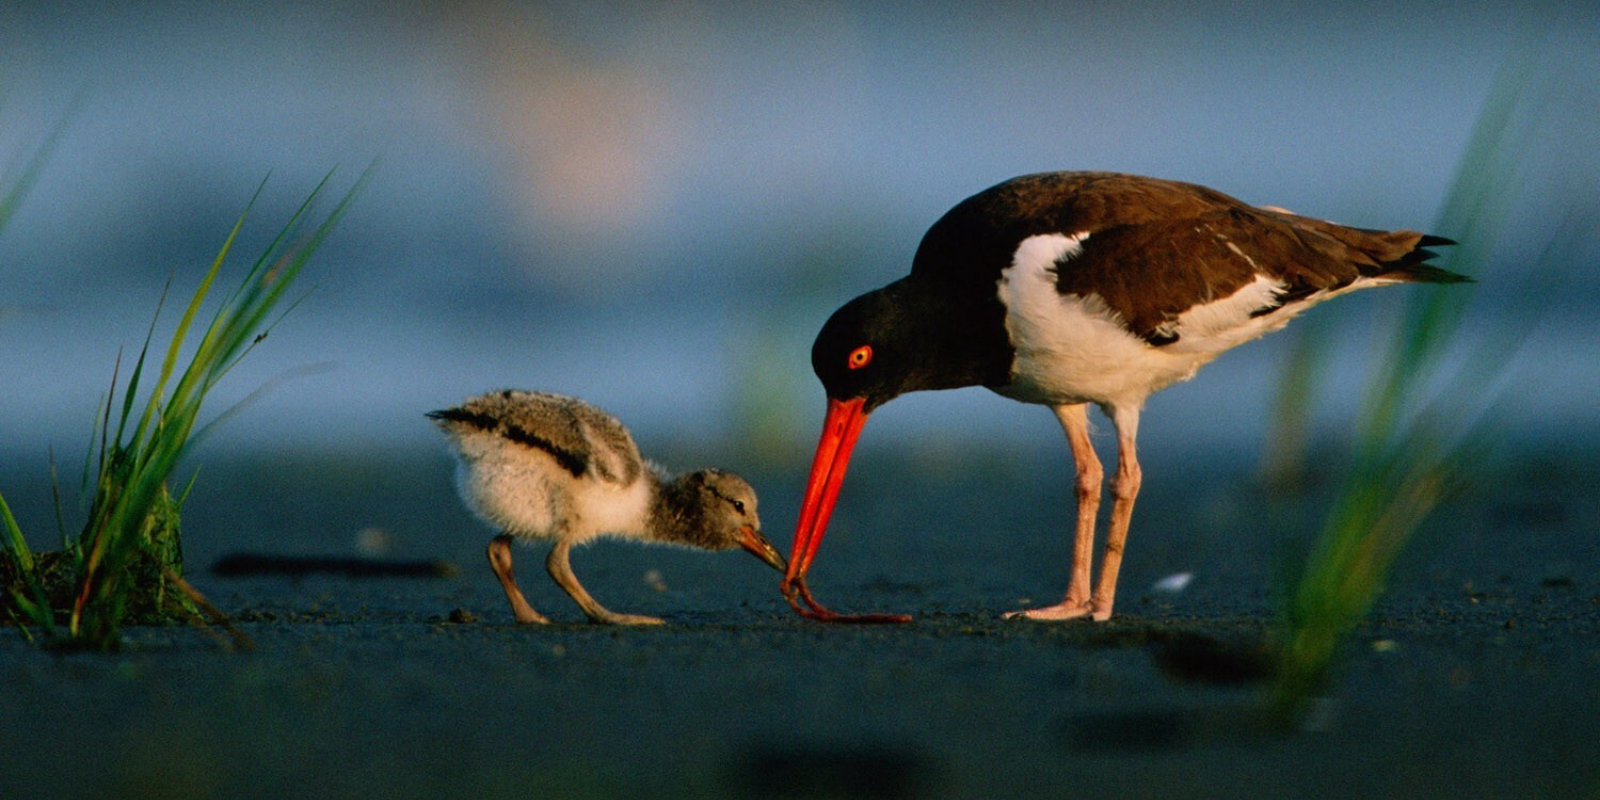 A pair of American oystercatchers on a shoreline eating a worm.